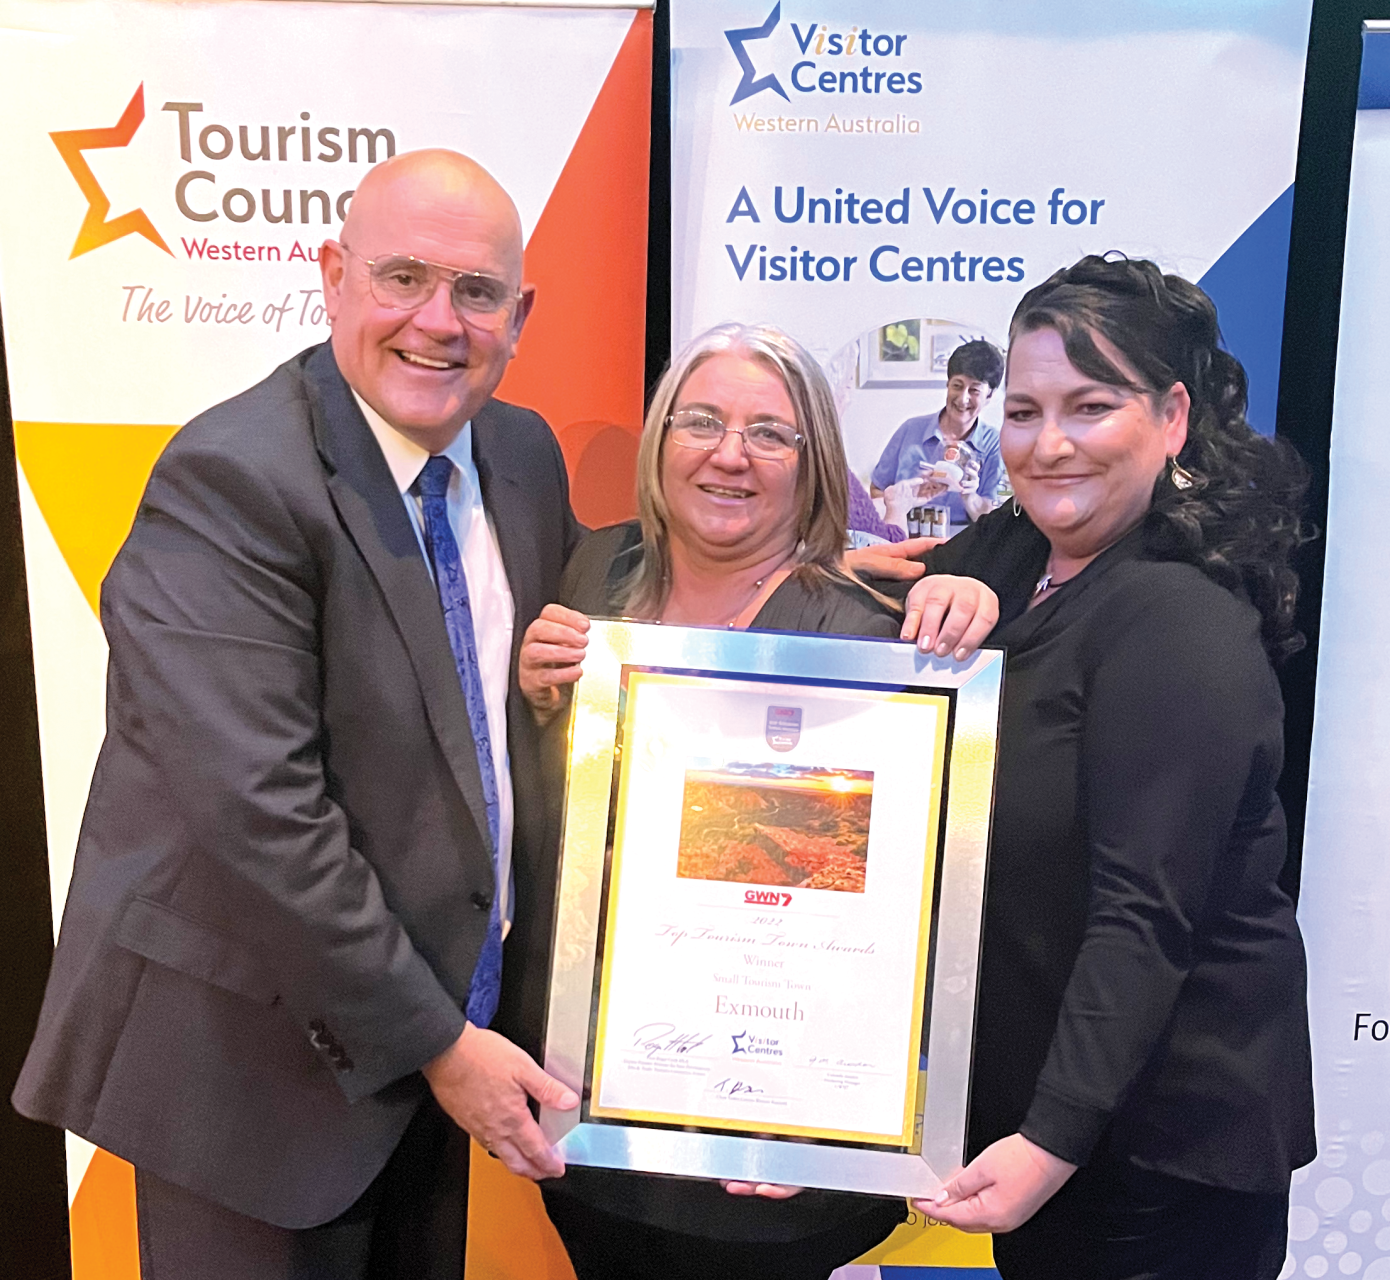 EXMOUTH CLAIMS GOLD AMONGST WA COMPETITORS IN 2022 TOURISM TOWN AWARDS